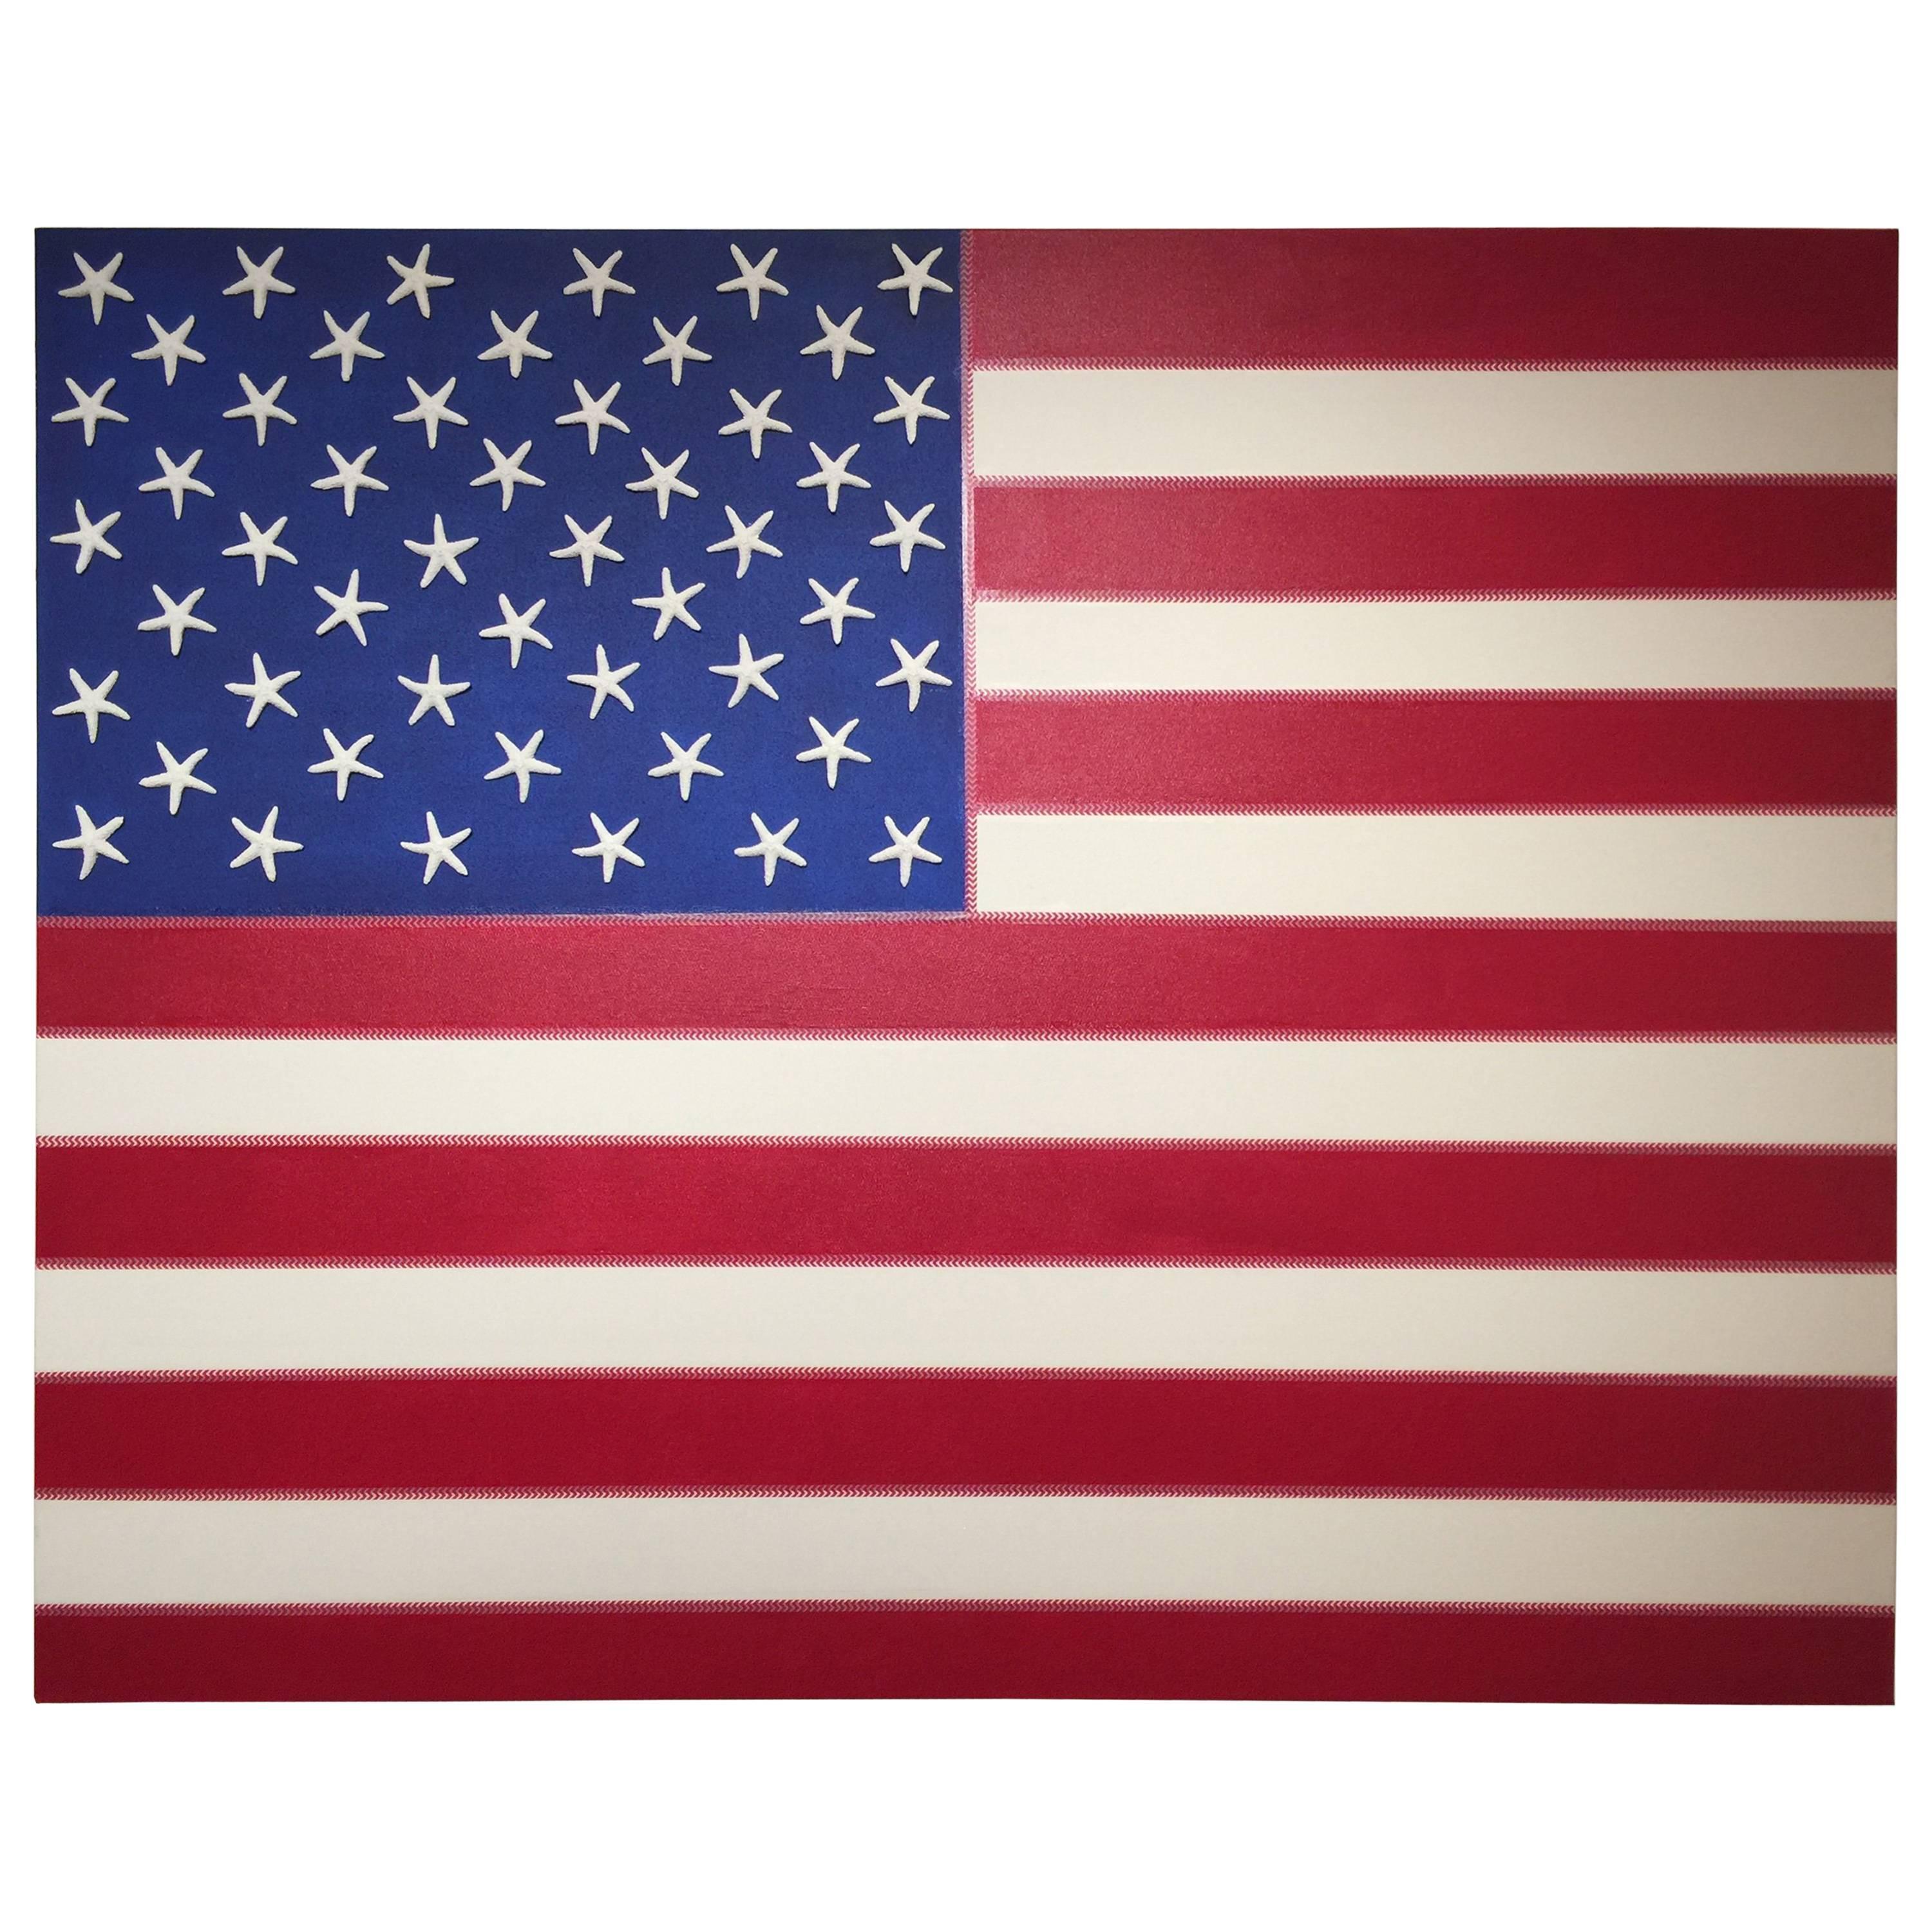 J. WOHNSEIDLER American Flag No. 1, 2017 Acrylic on Canvas For Sale